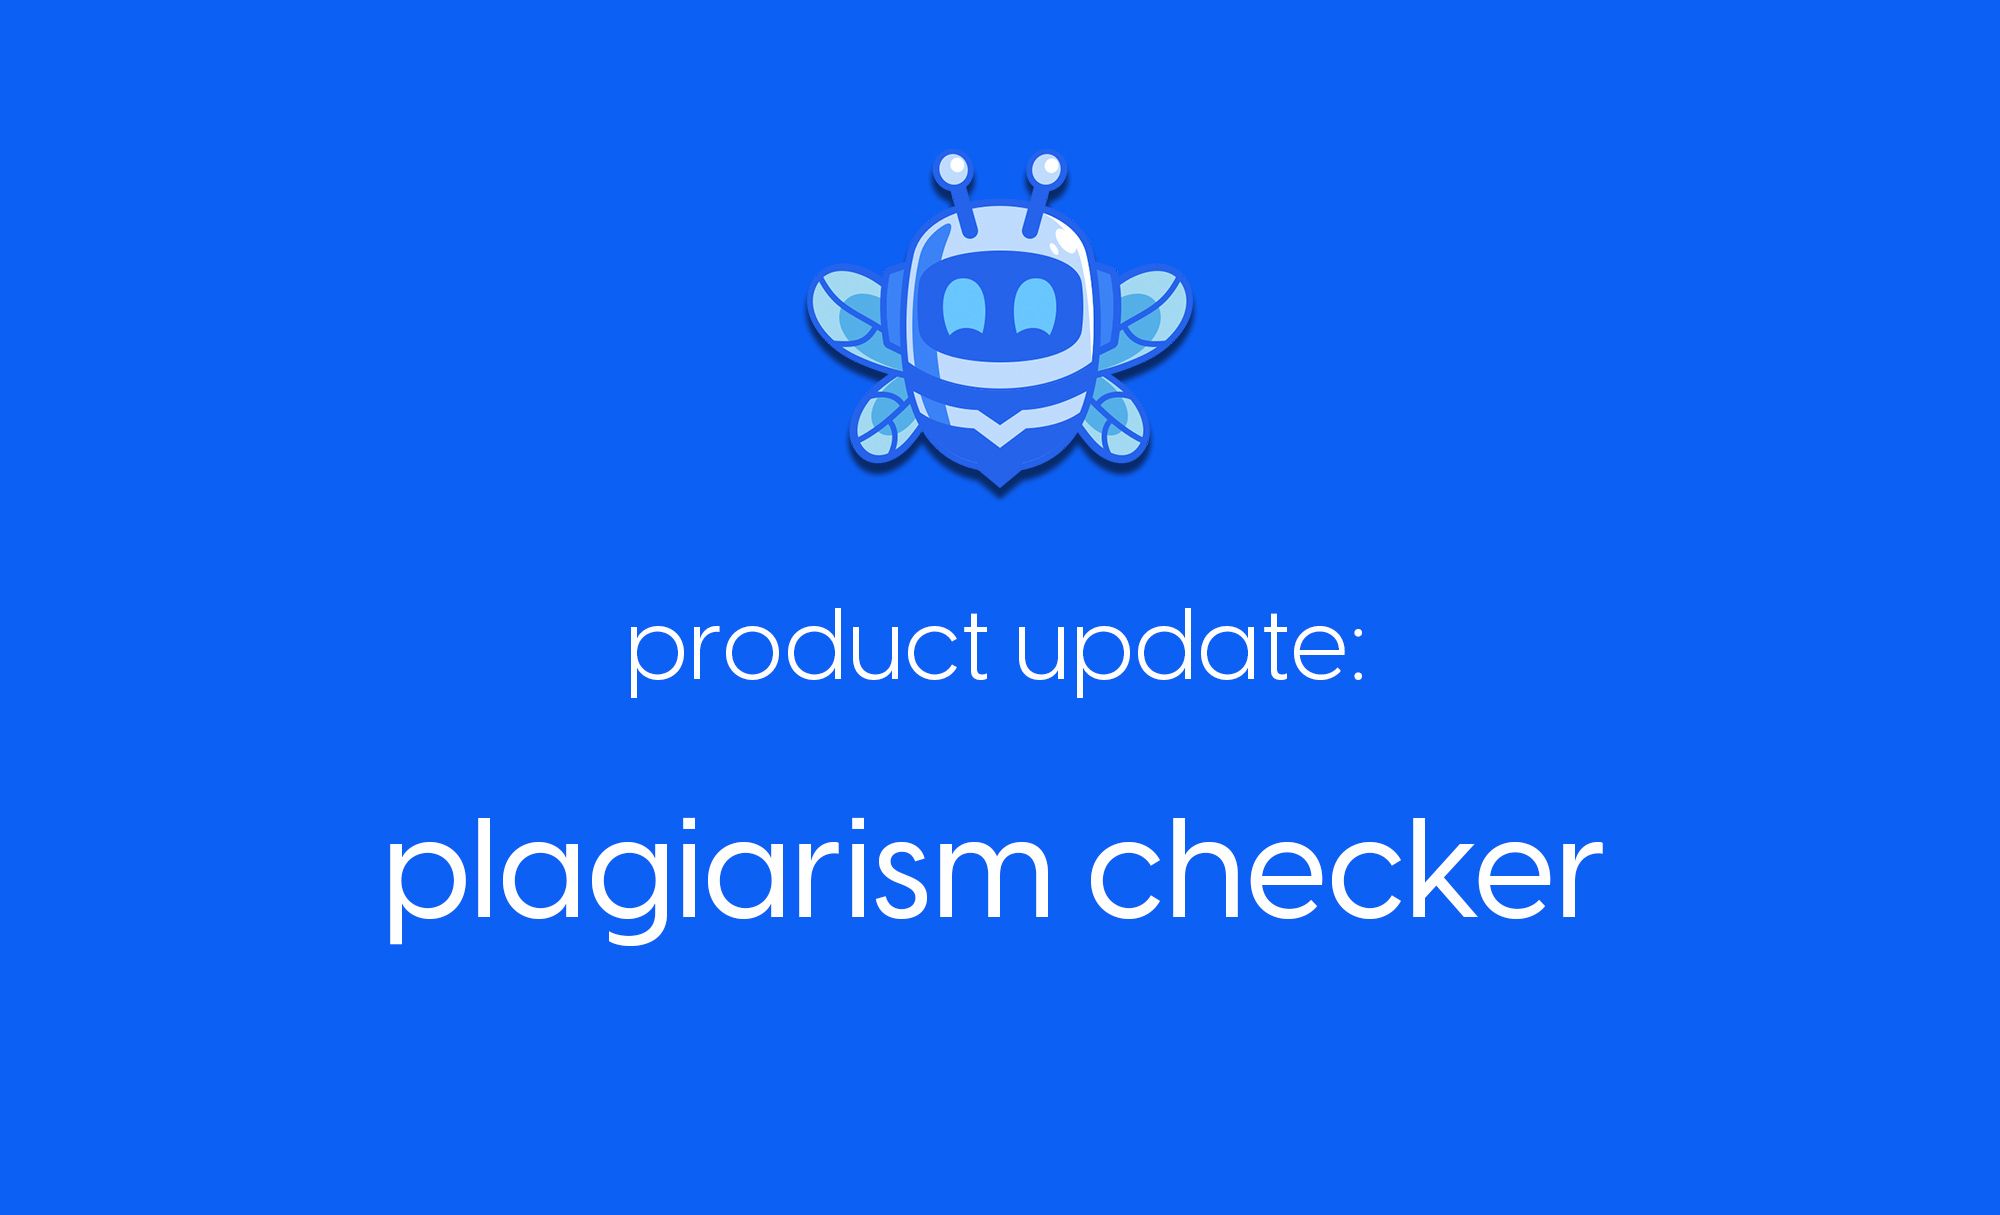 online assignment plagiarism checker project using ai